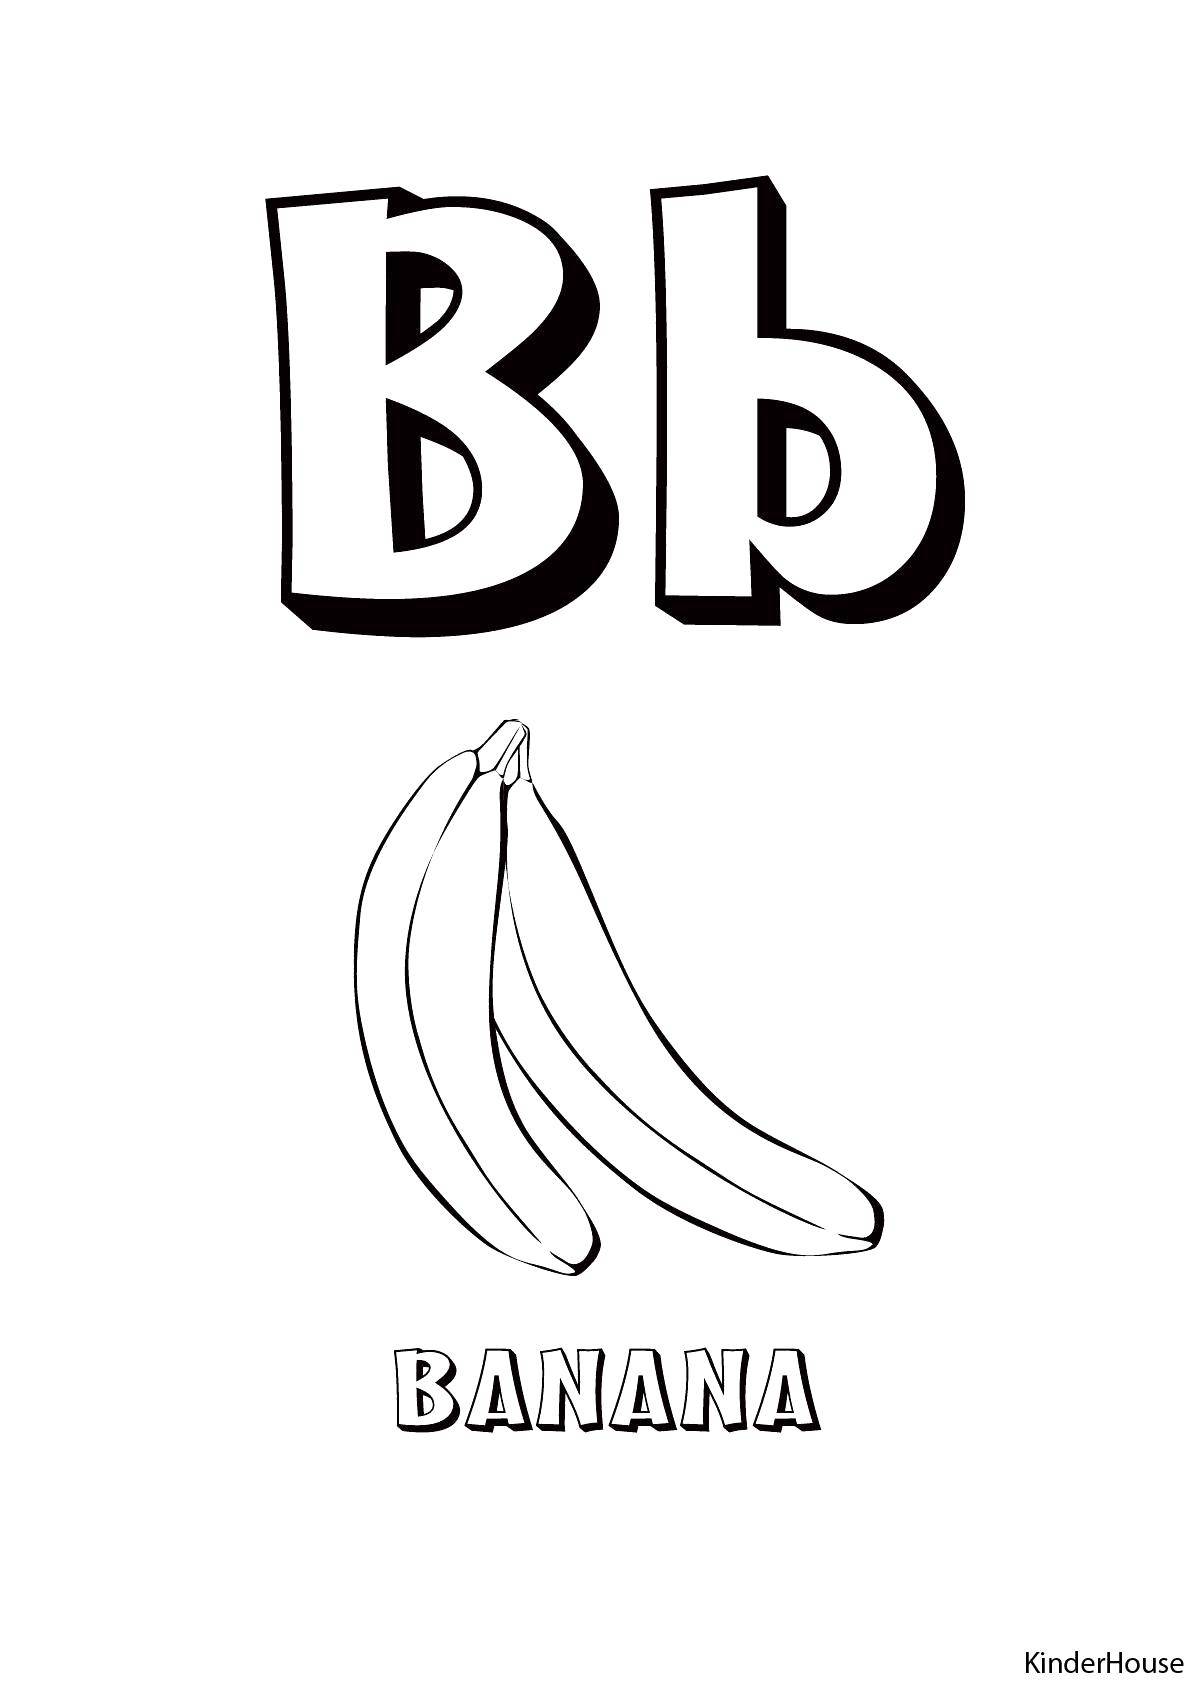 Coloring Banana b. Category English. Tags:  The alphabet, letters, words.